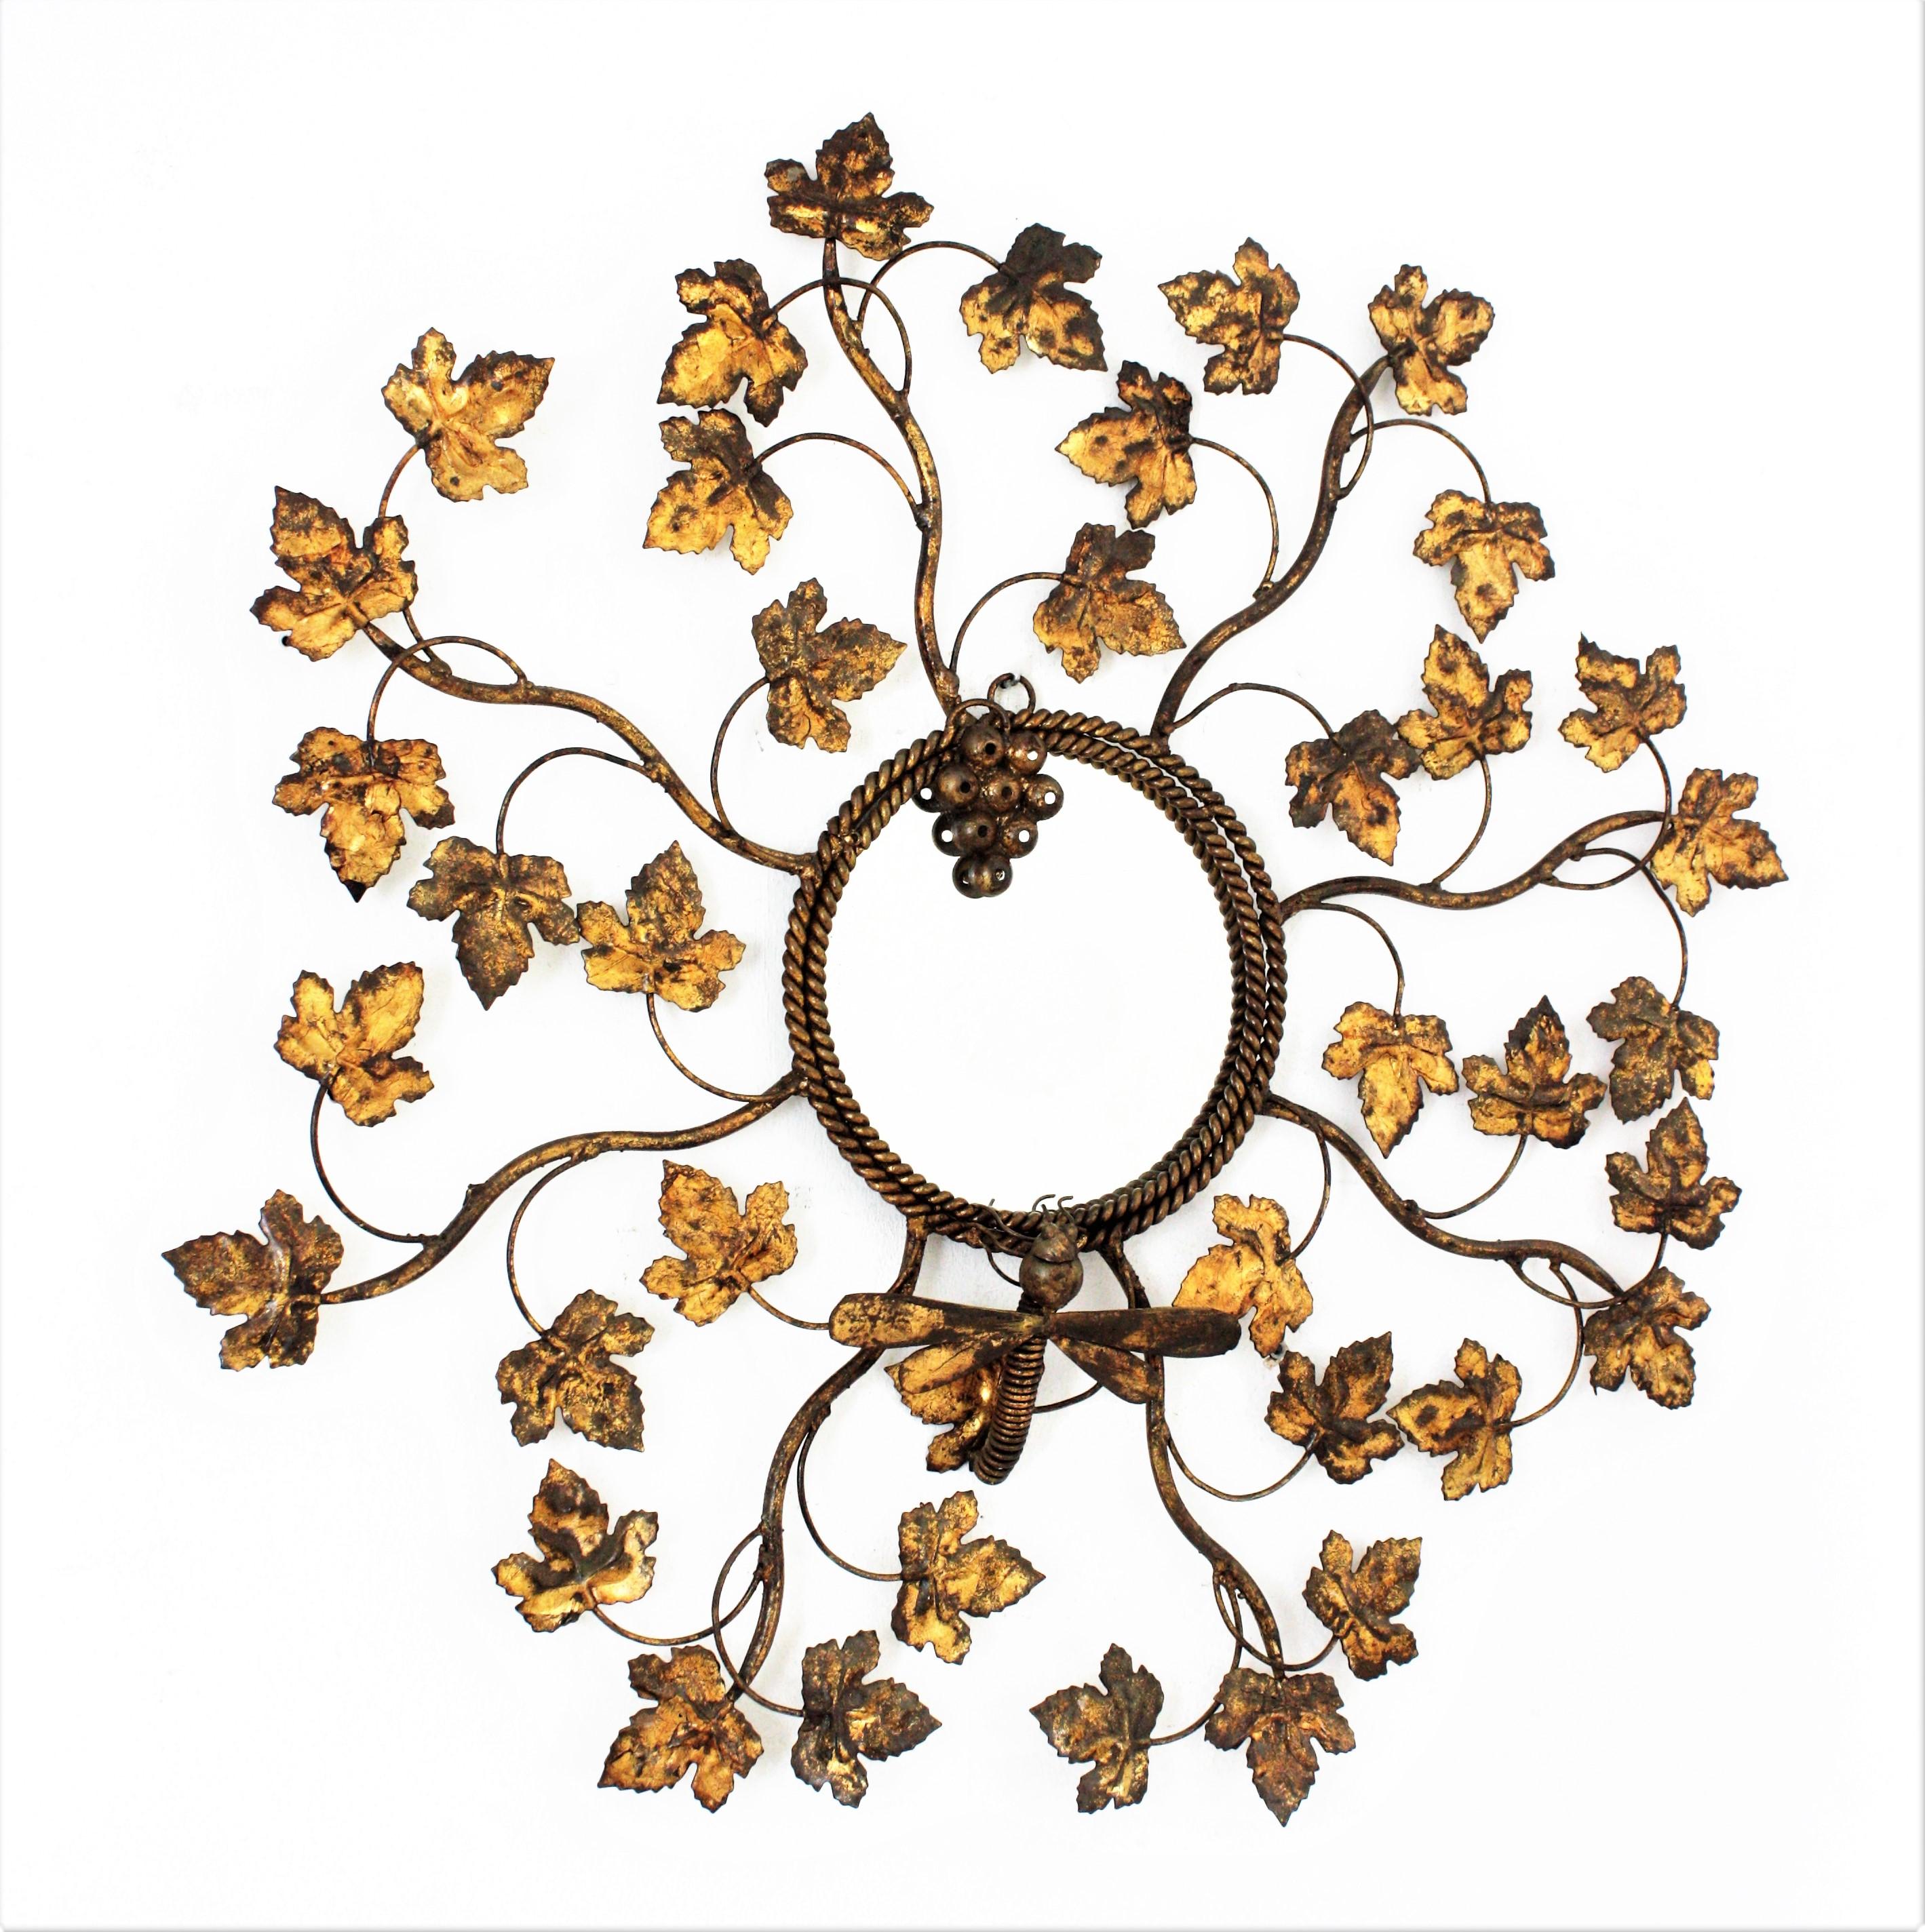 Naturalistic Design sunburst mirror, Gilt Metal, Gold Leaf, France, 1950s.
One of a kind sunburst mirror featuring a frame comprised by branches with vine leafs adorned with a bunch of grapes and a dragon fly.
This mirror was handcrafted at the